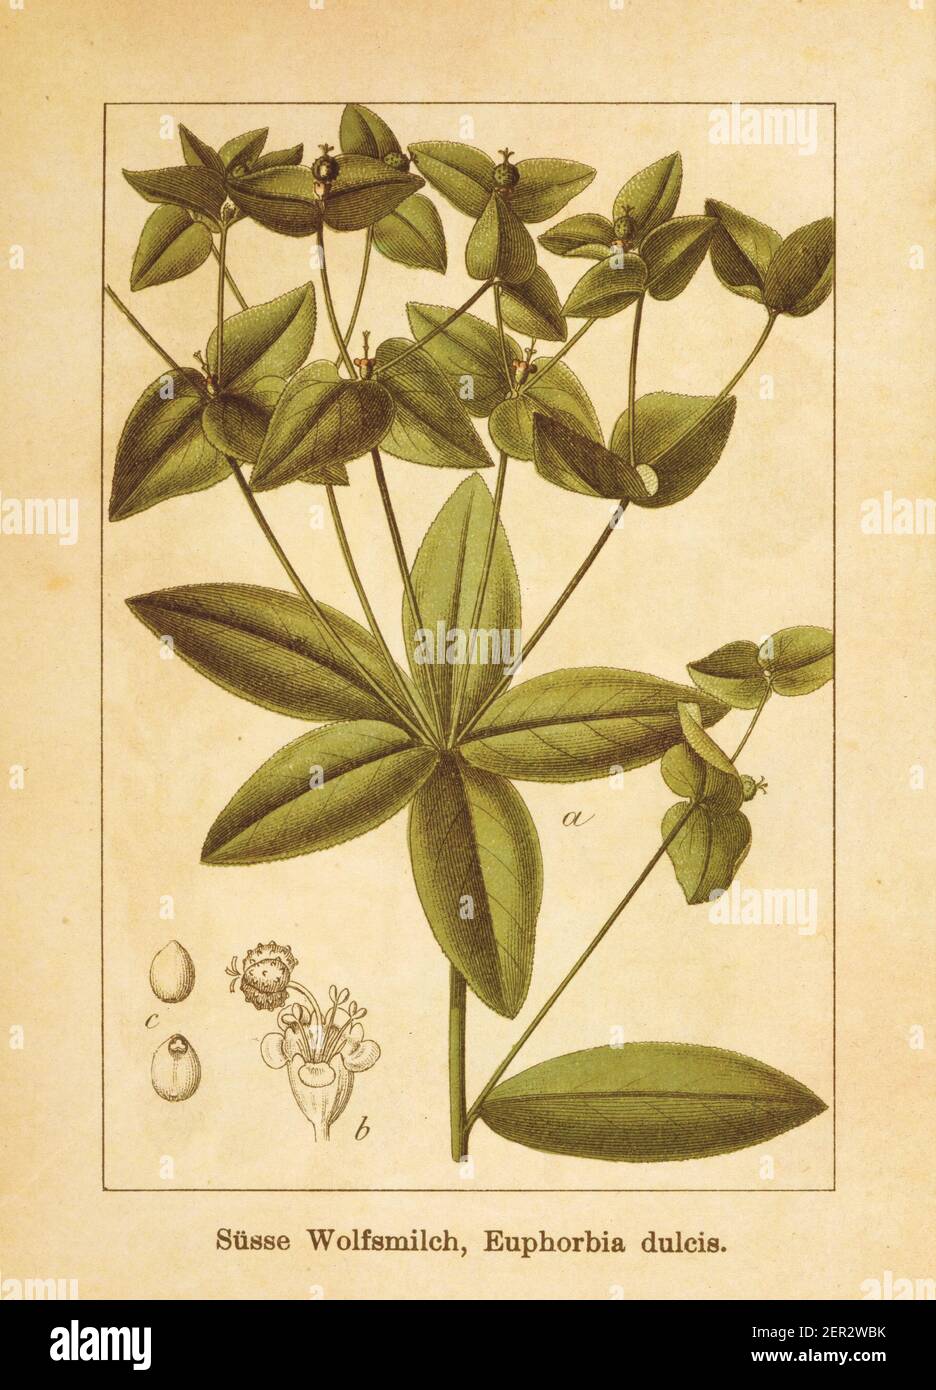 Antique illustration of an euphorbia dulcis, also known as spurge. Engraved by Jacob Sturm (1771-1848) and published in the book Deutschlands Flora in Stock Photo